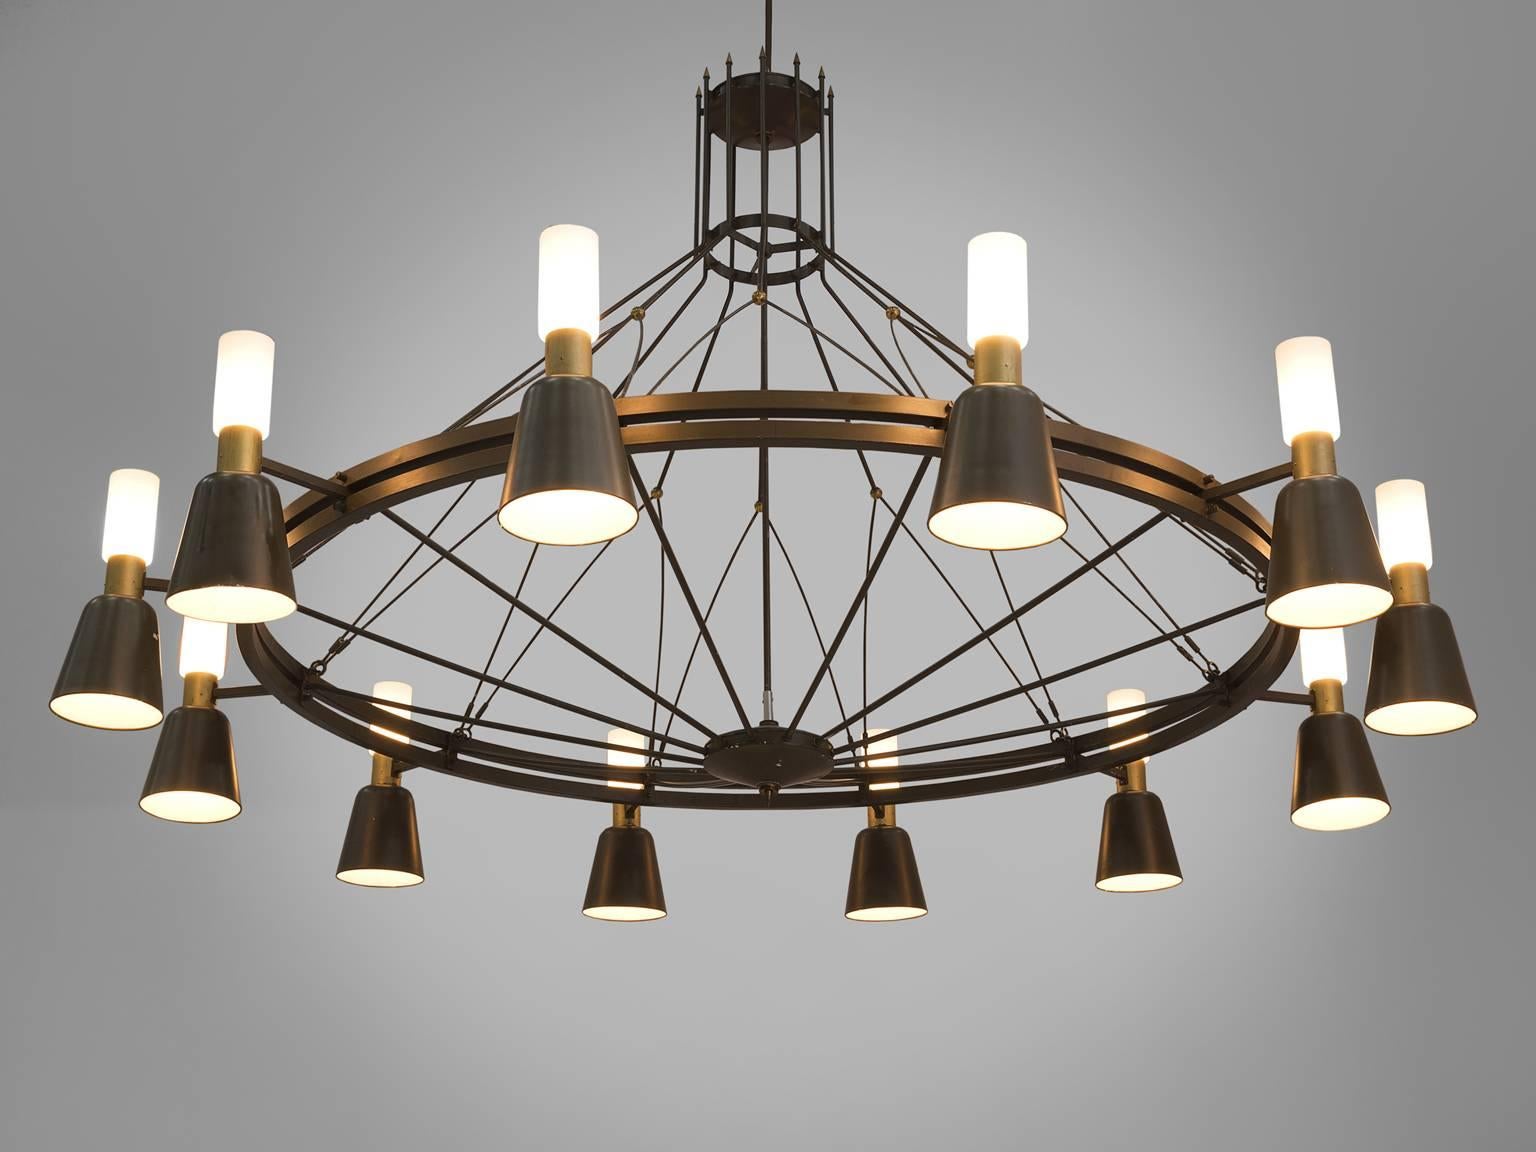 Chandelier, metal, glass the Netherlands, circa 1950.

This large Dutch chandelier is very refined and vibrant. The chandelier is made in the 1950s by a local designer in the Eastern region of the Netherlands. The chandelier features twelve shades